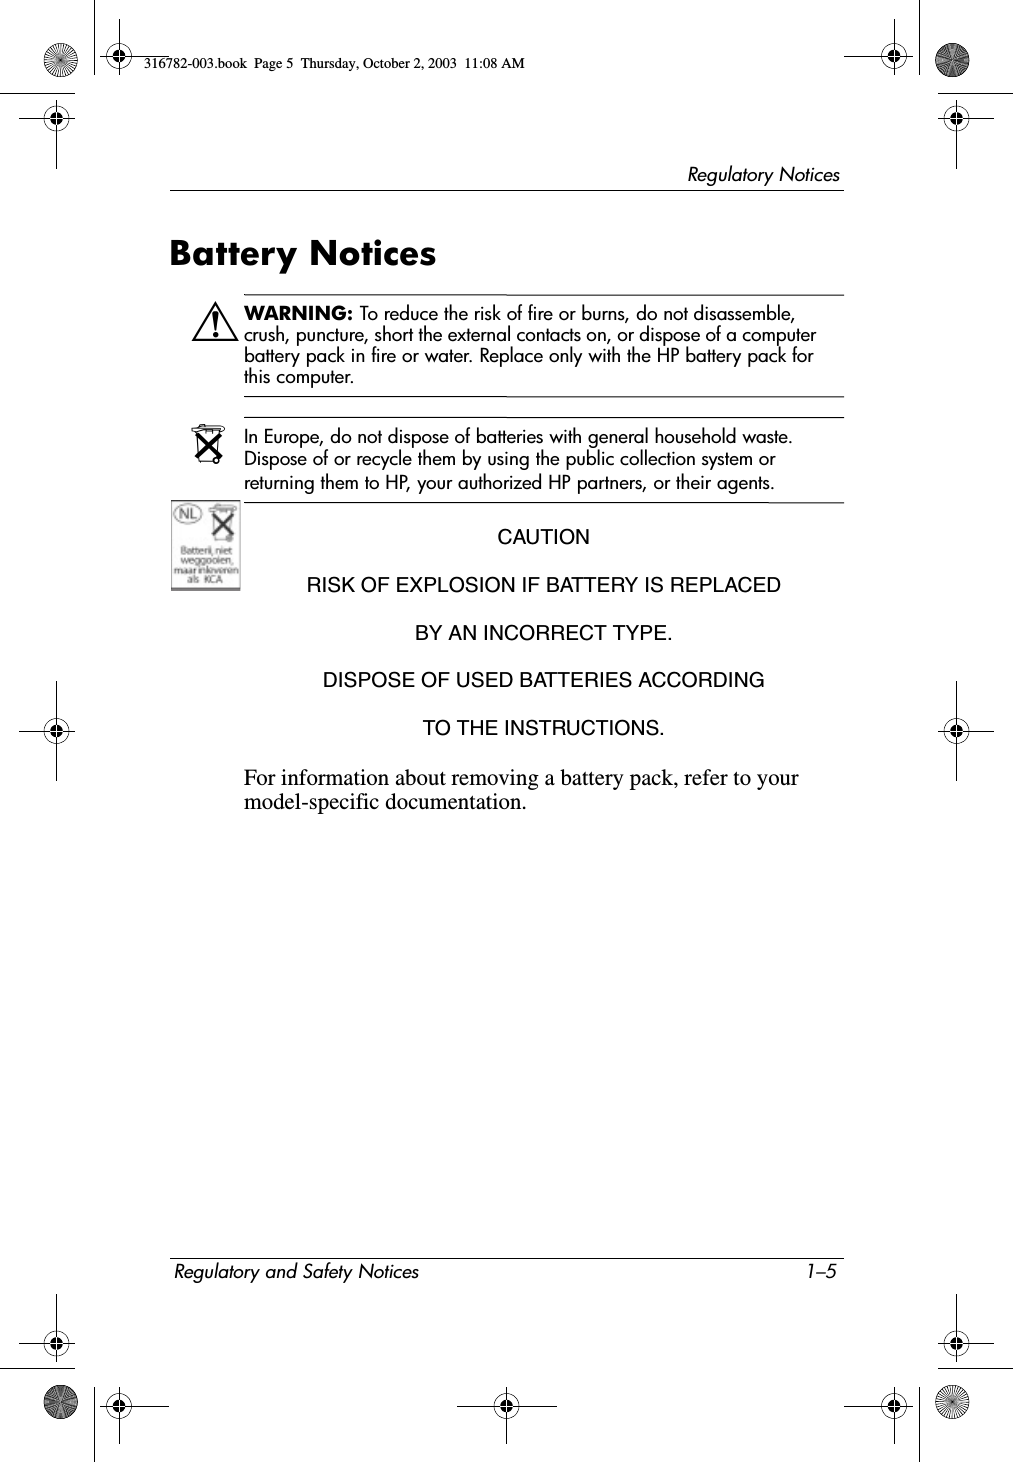 Regulatory NoticesRegulatory and Safety Notices 1–5Battery NoticesÅWARNING: To reduce the risk of fire or burns, do not disassemble, crush, puncture, short the external contacts on, or dispose of a computer battery pack in fire or water. Replace only with the HP battery pack for this computer.NIn Europe, do not dispose of batteries with general household waste. Dispose of or recycle them by using the public collection system or returning them to HP, your authorized HP partners, or their agents.CAUTIONRISK OF EXPLOSION IF BATTERY IS REPLACEDBY AN INCORRECT TYPE.DISPOSE OF USED BATTERIES ACCORDINGTO THE INSTRUCTIONS.For information about removing a battery pack, refer to your model-specific documentation.316782-003.book  Page 5  Thursday, October 2, 2003  11:08 AM